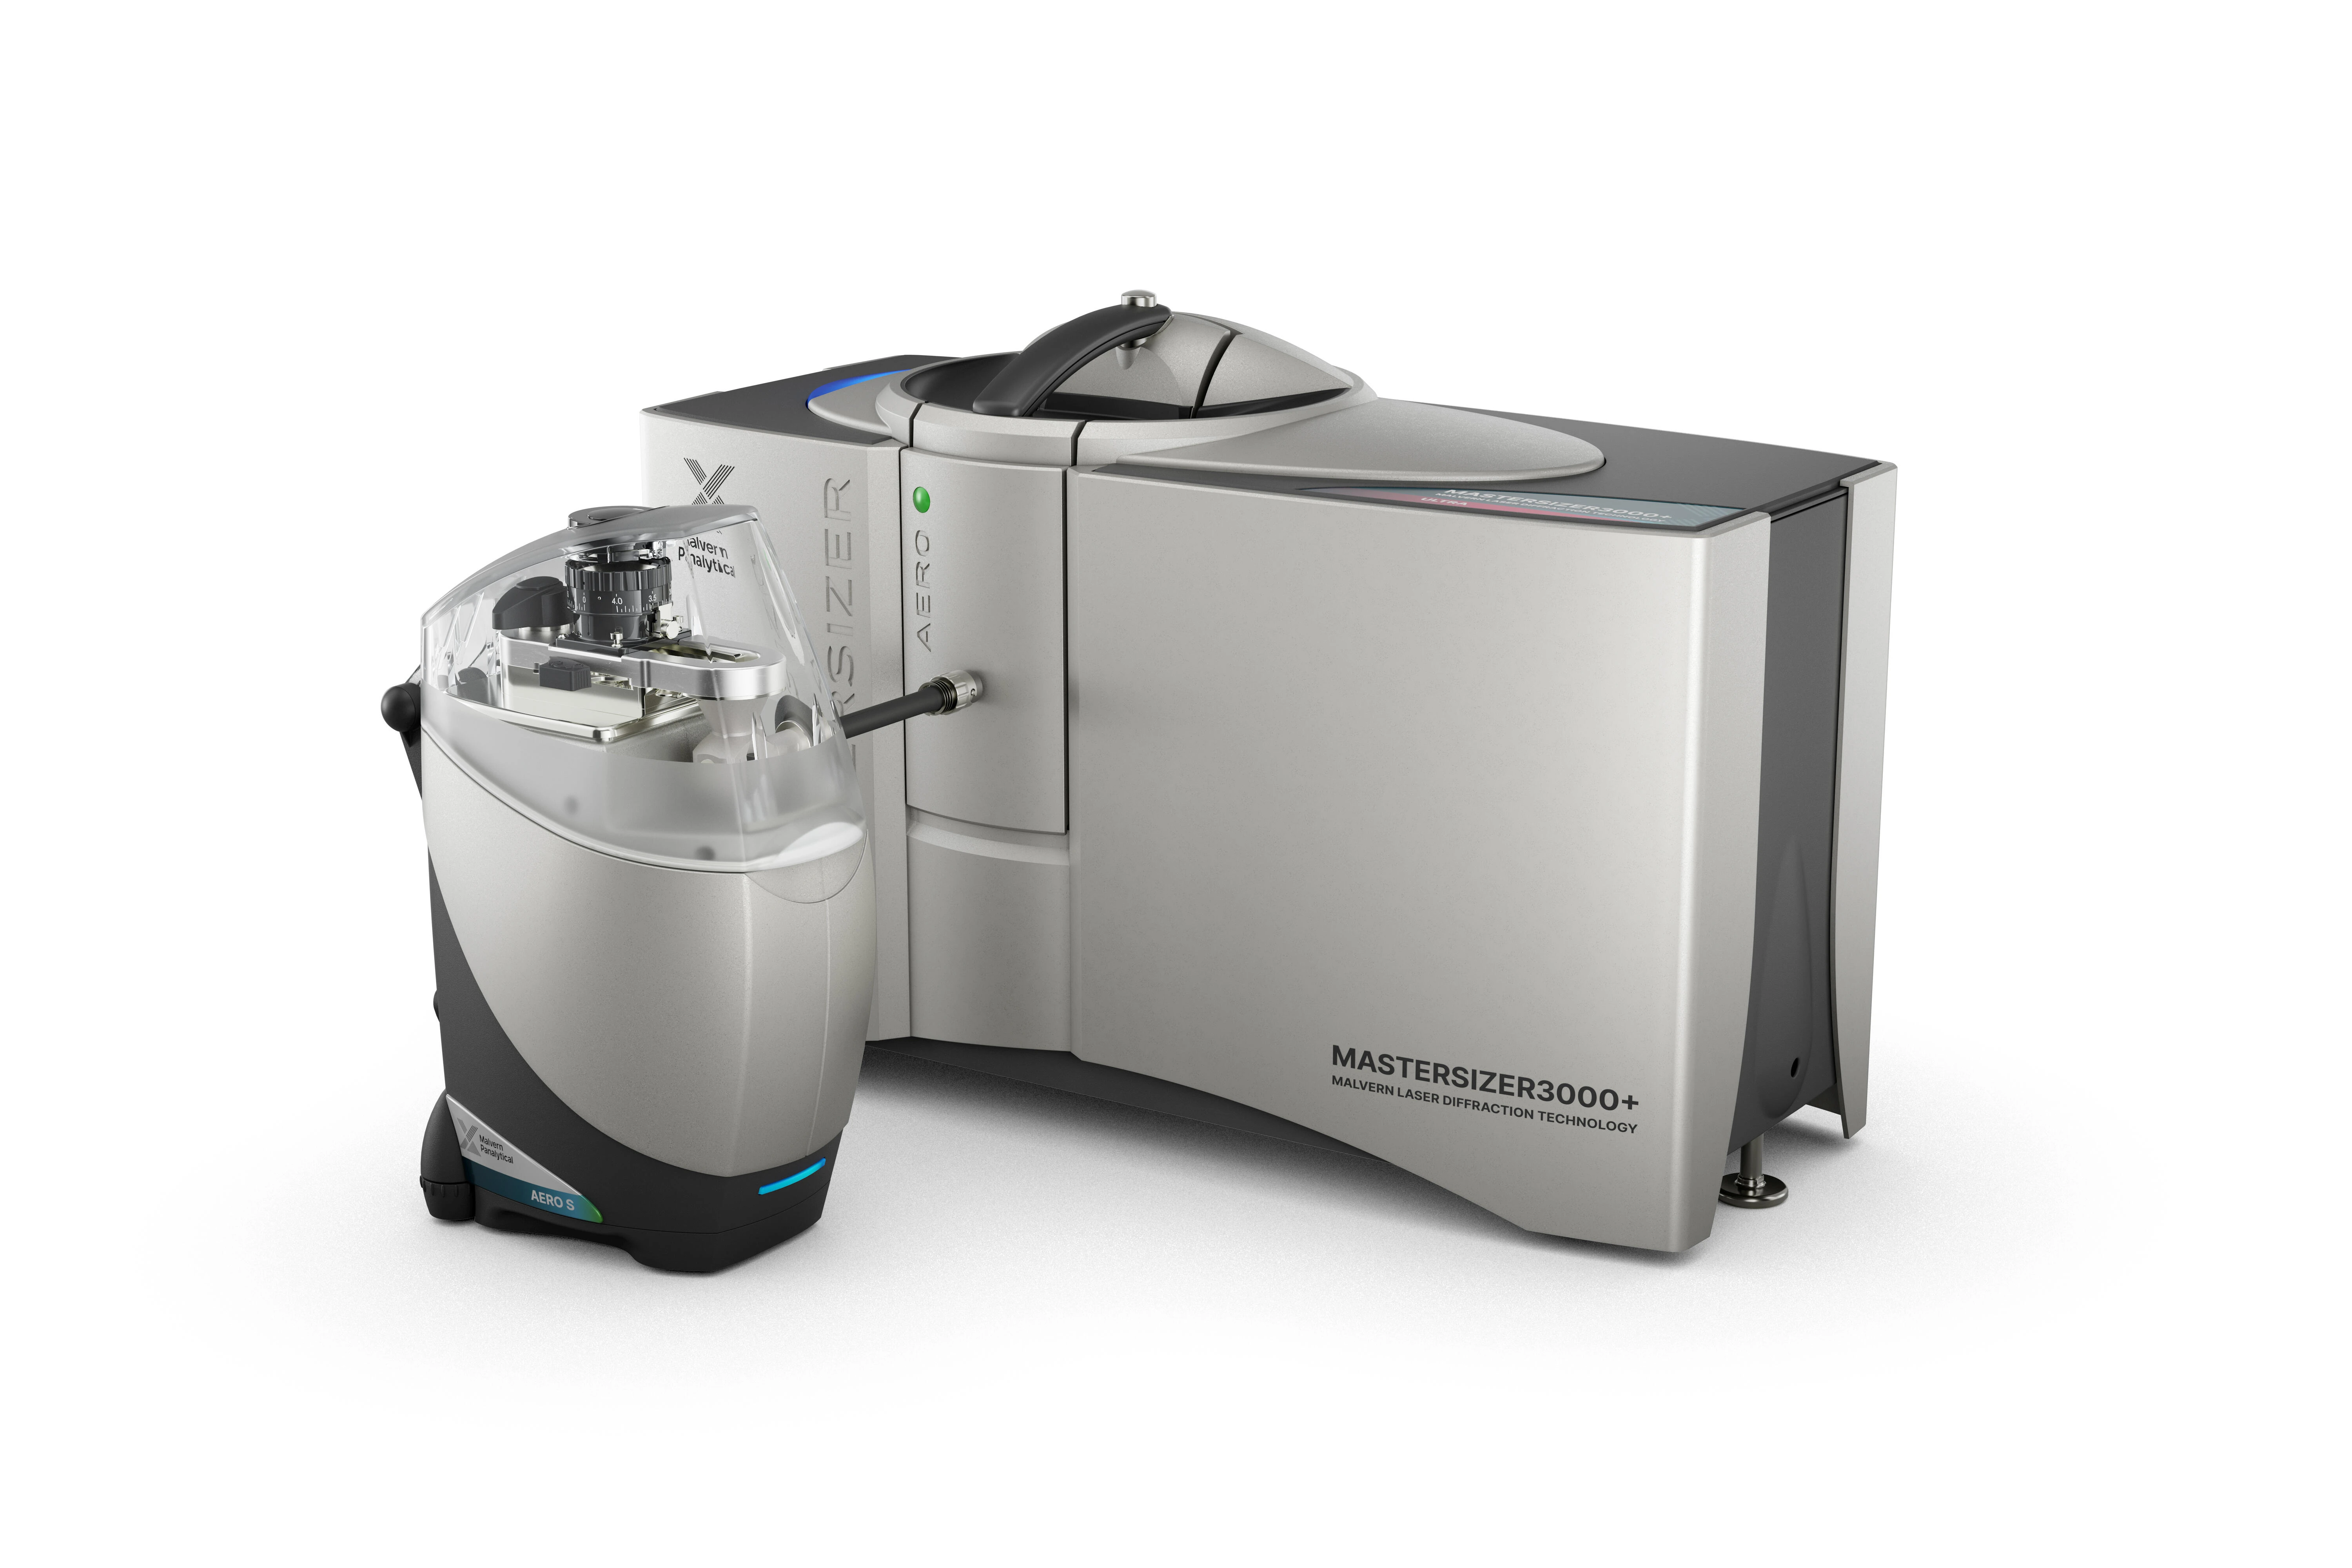 Mastersizer 3000+ Ultra - Class leading particle size performance with innovative software solutions